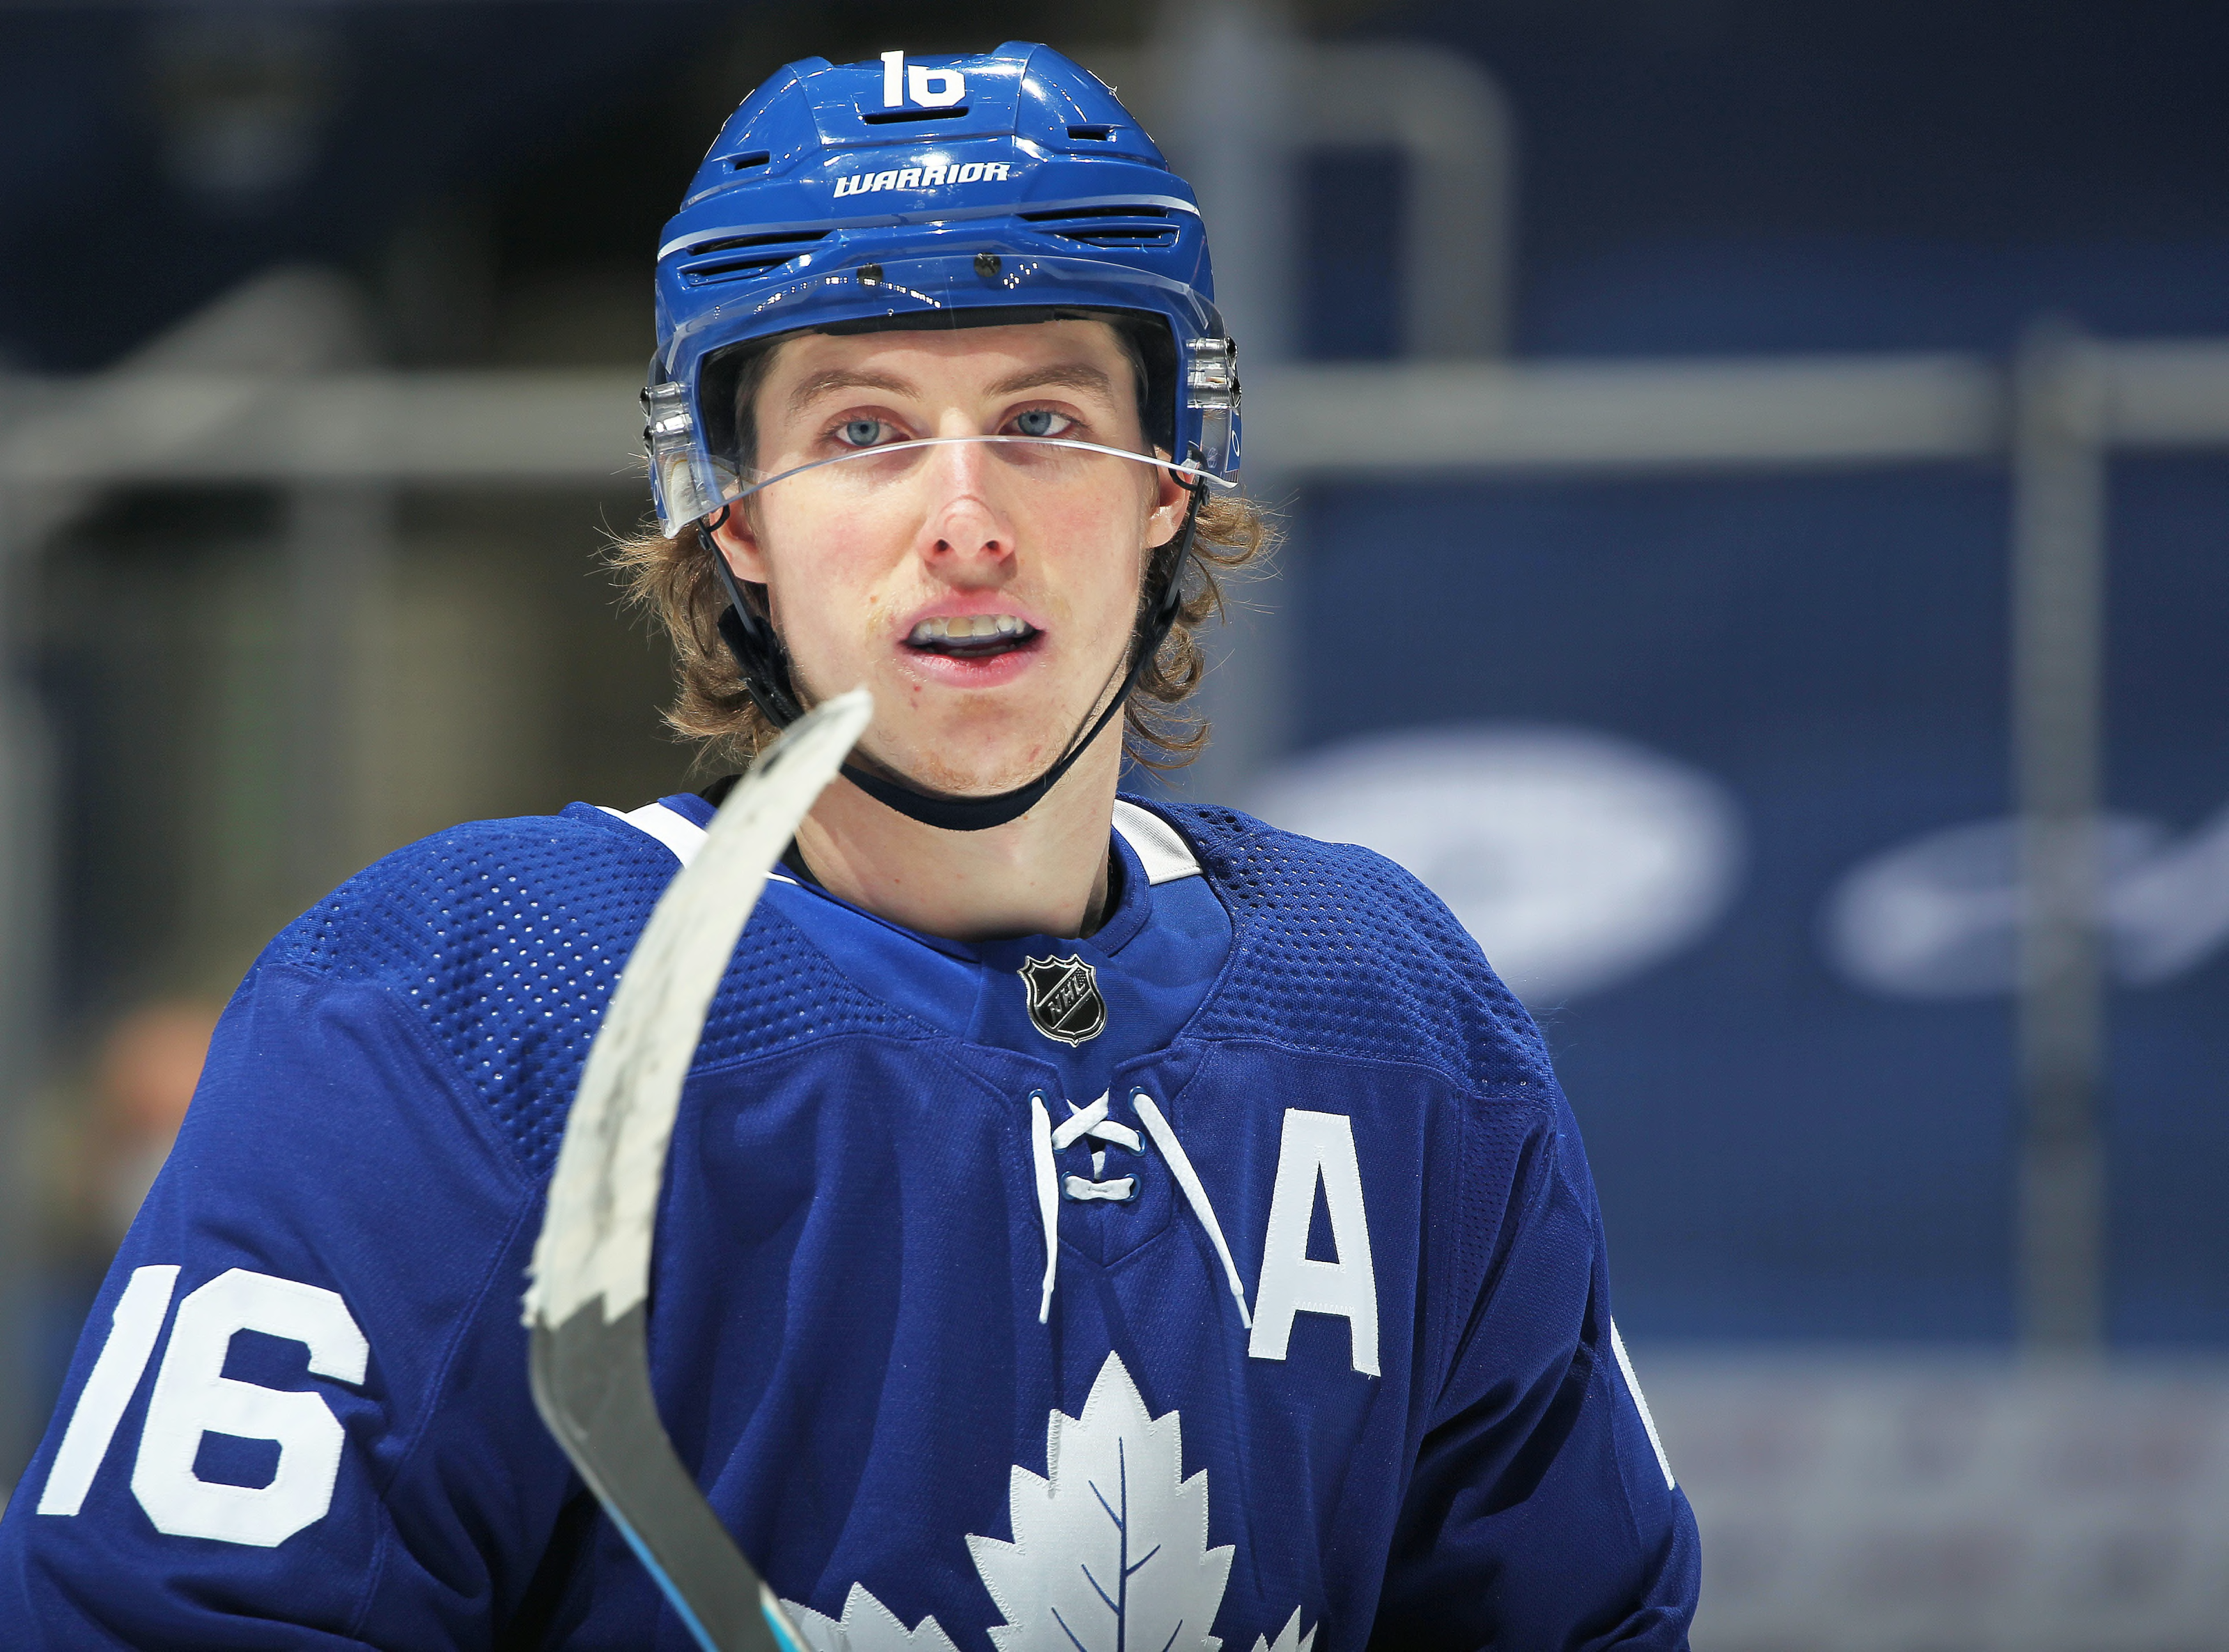 Inside the unlikely bond between Leafs forwards Mitch Marner and